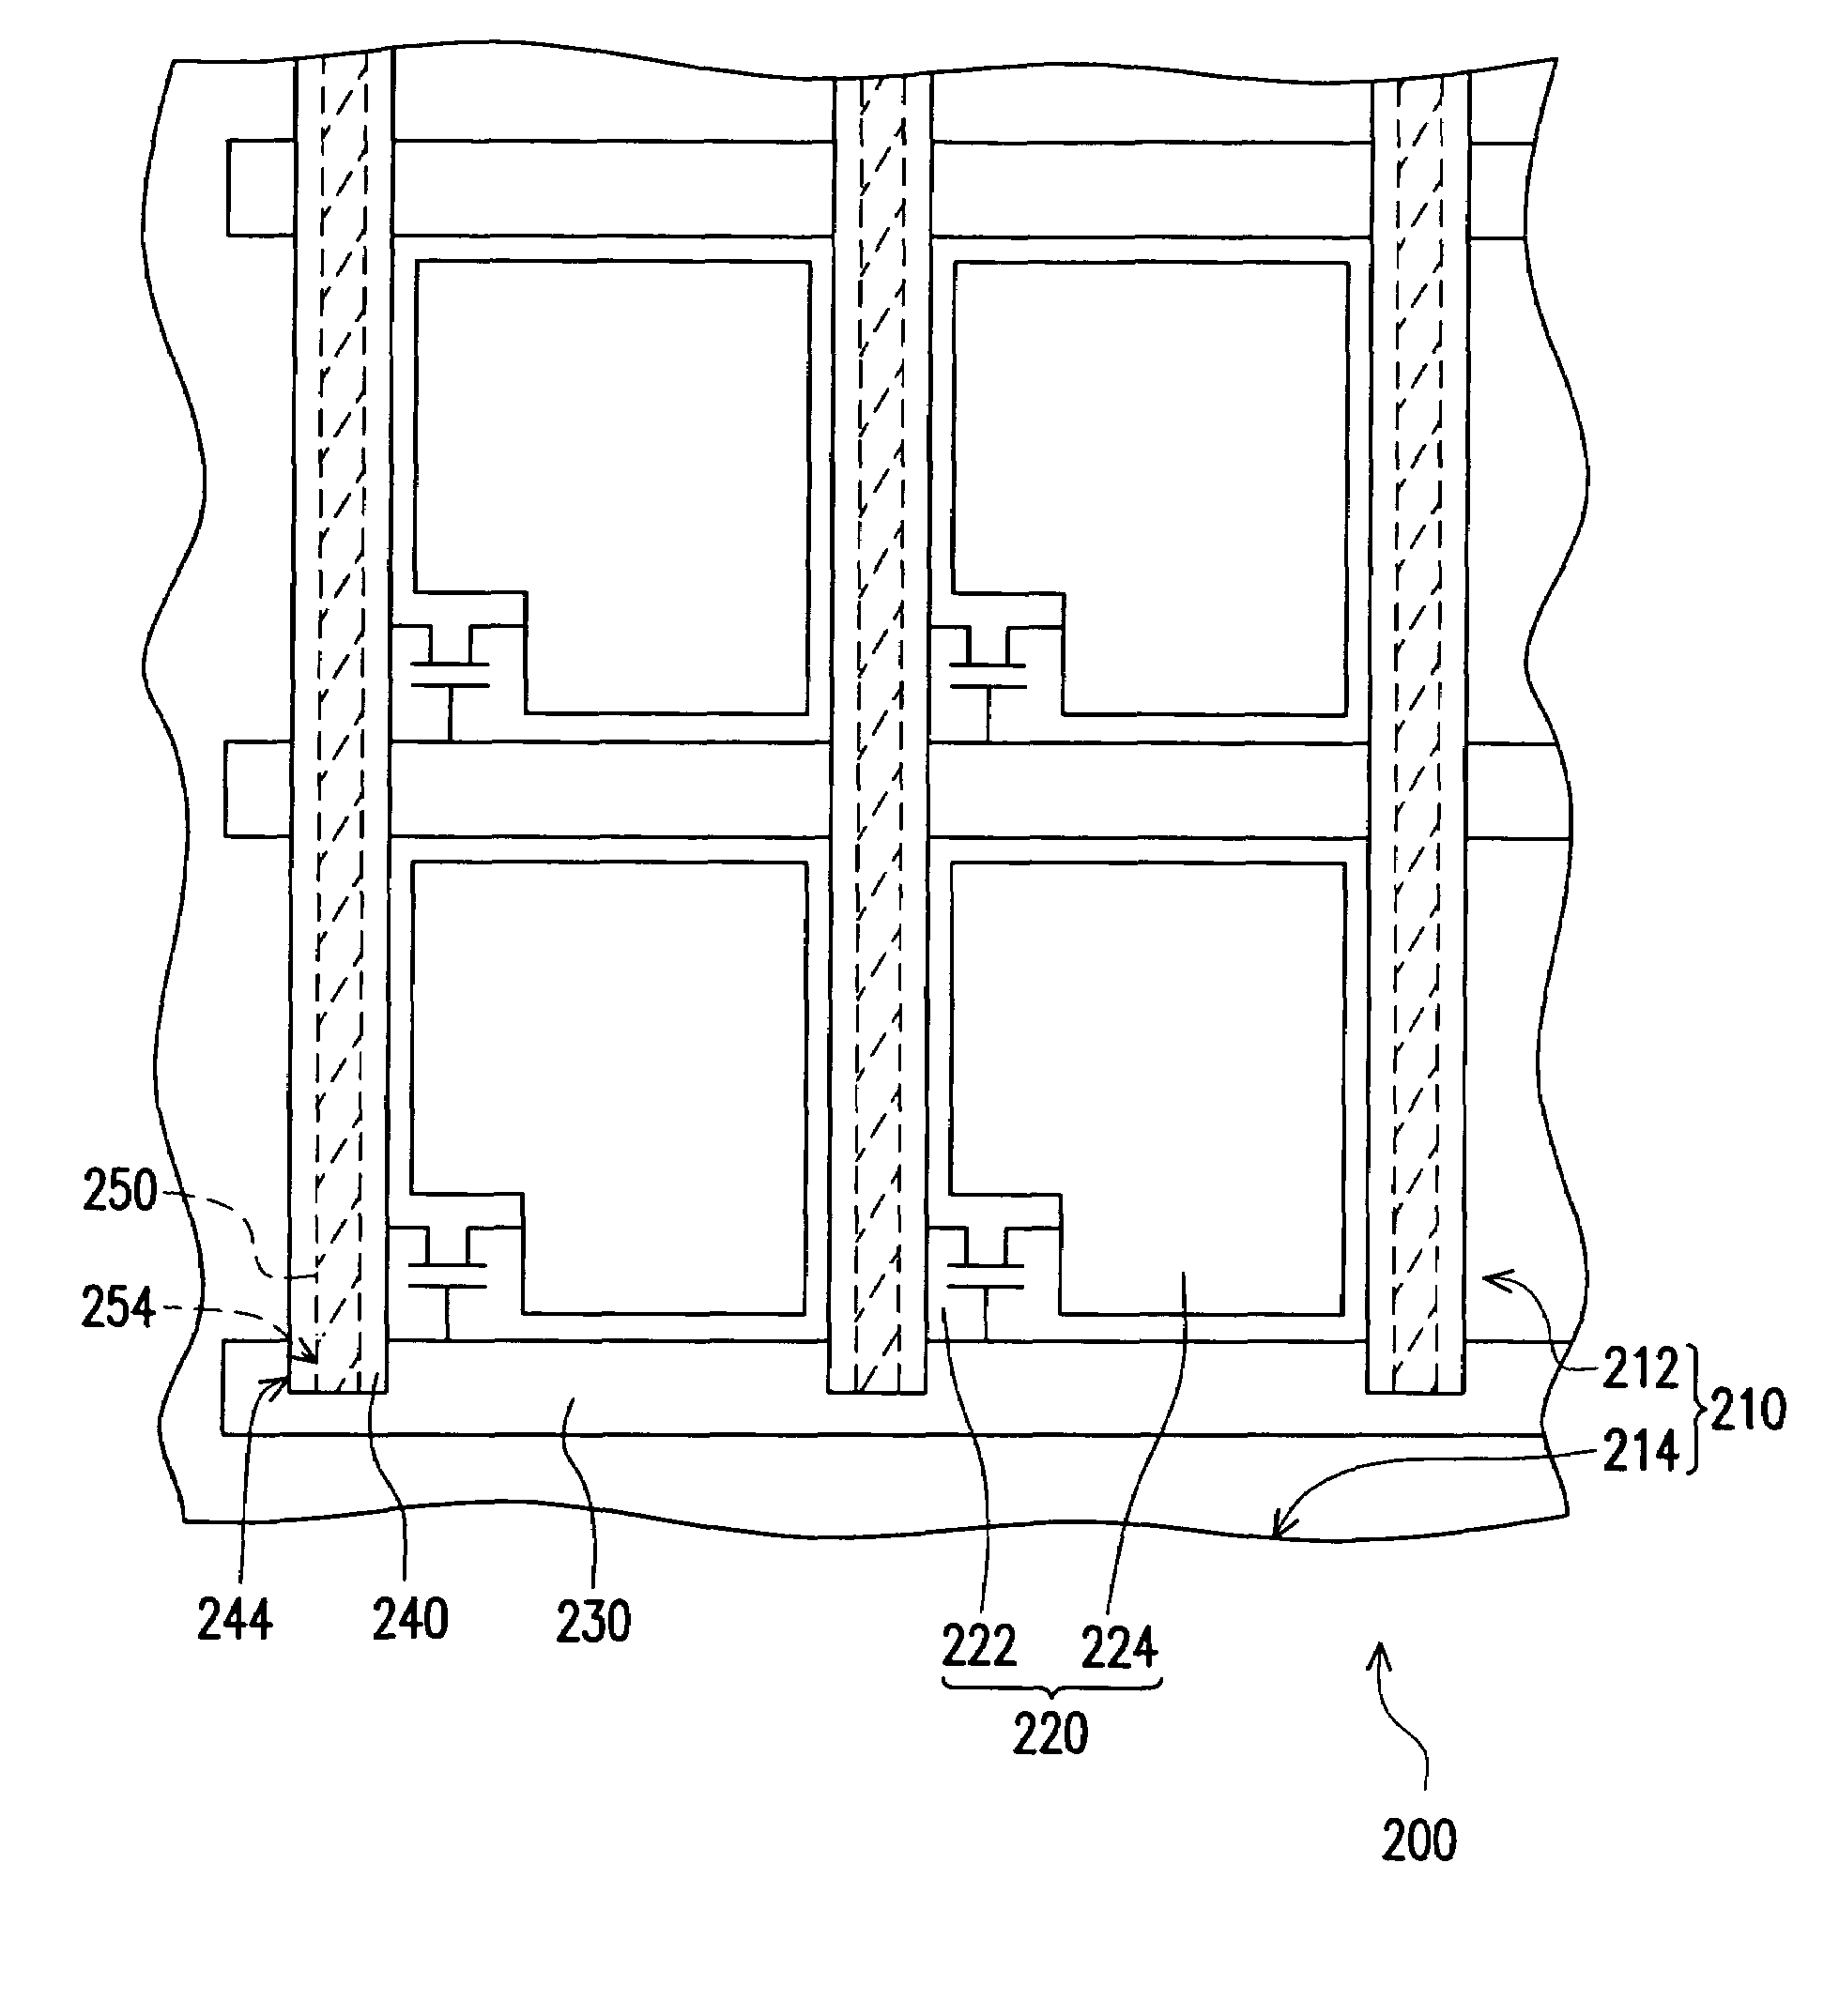 Thin film transistor array substrate having scan or data lines extending to peripheral area without exceeding respectively outmost data and scan lines for reducing electrostatic discharge damage